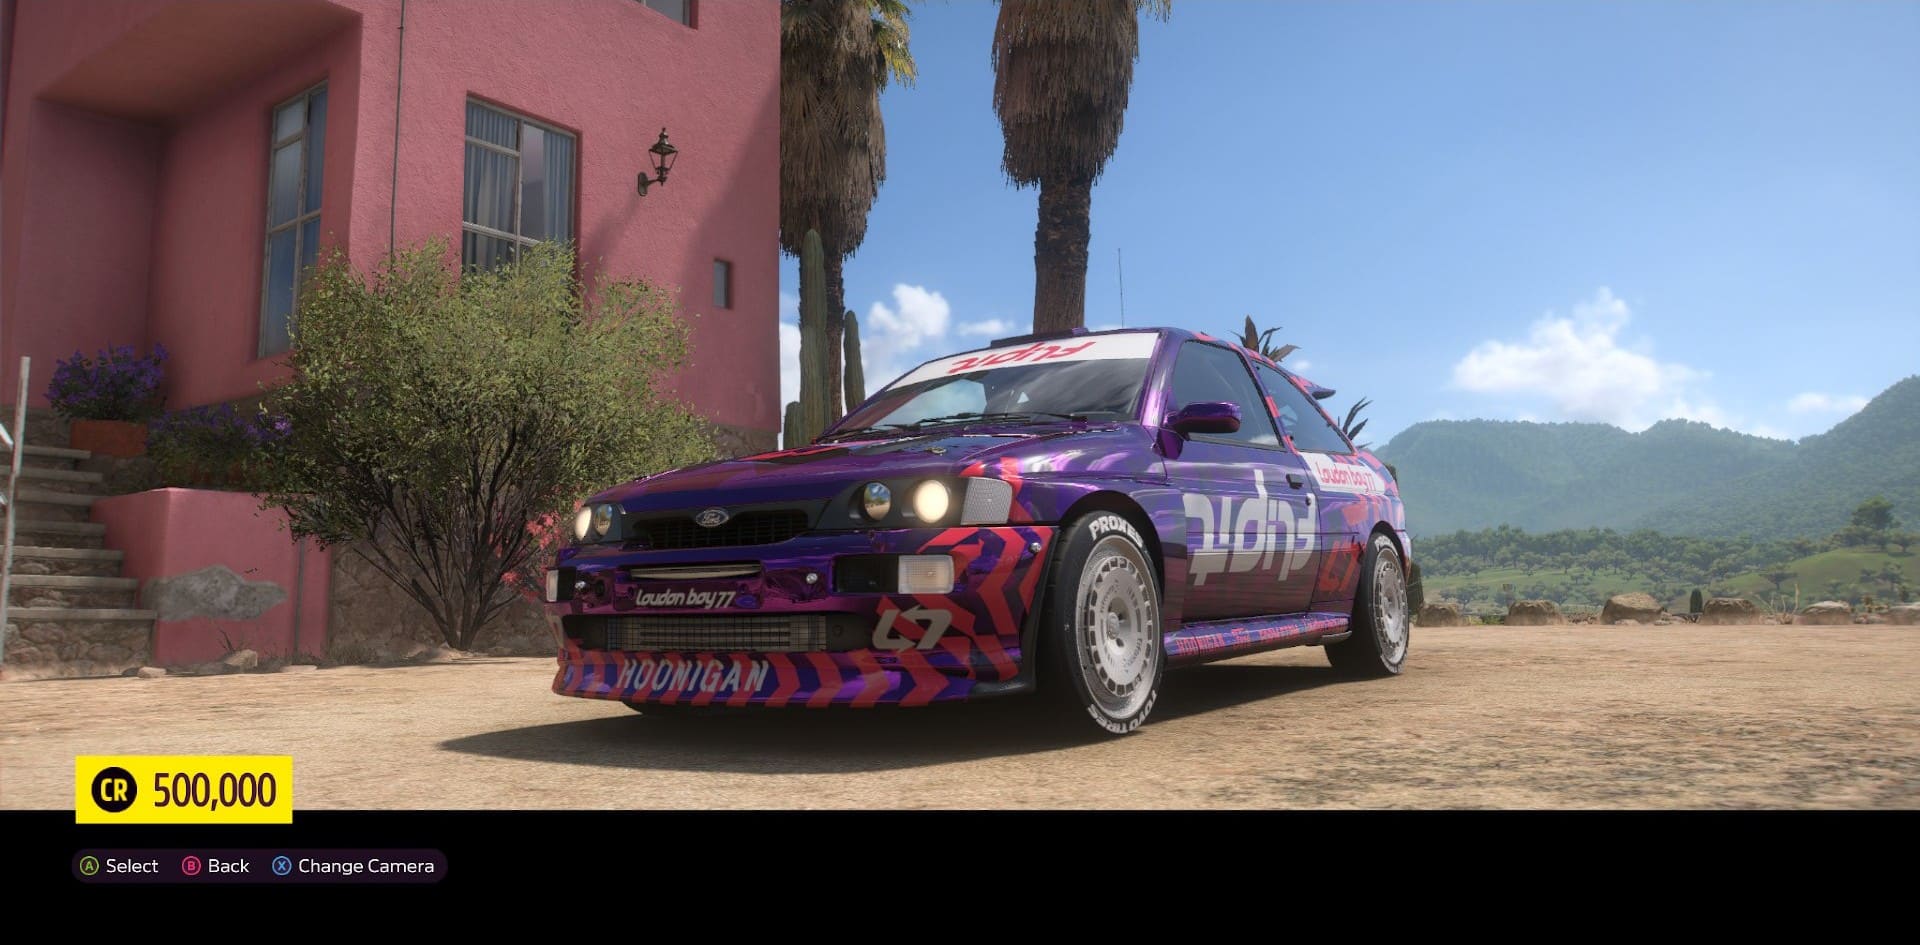 Clear view of the Hoonigan Escort in Forza Horizon 5